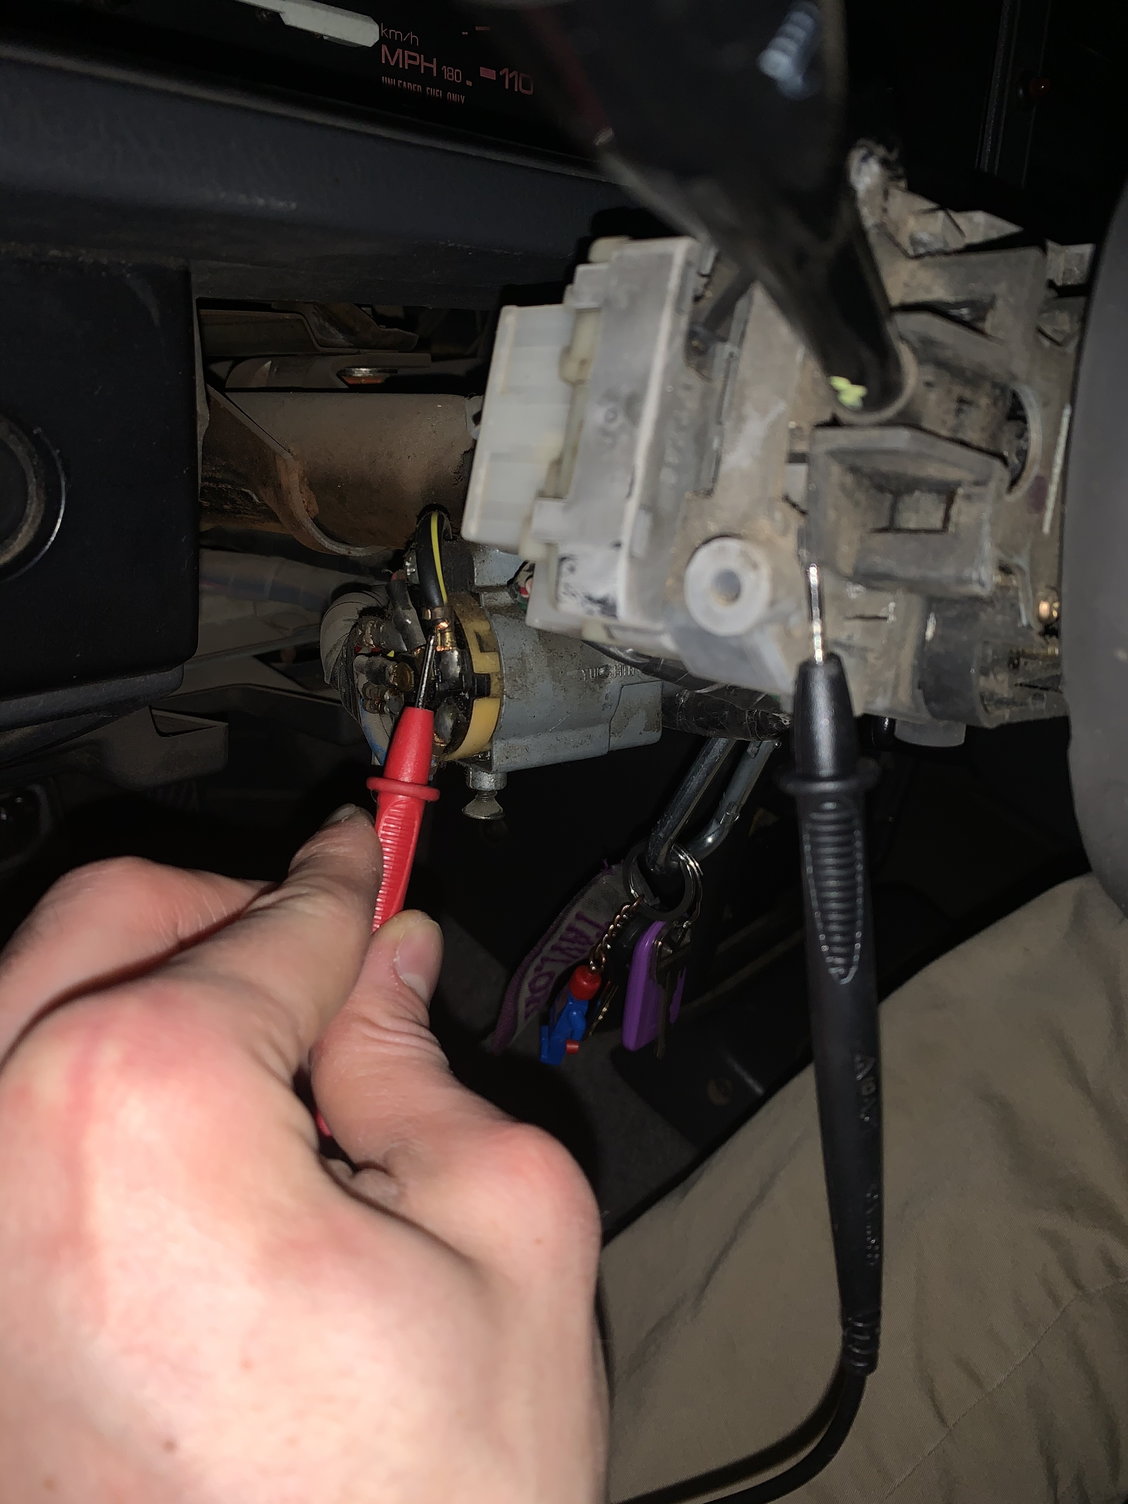 89 B2200 Ignition/Starting Issues Page 2 Mazda Forum